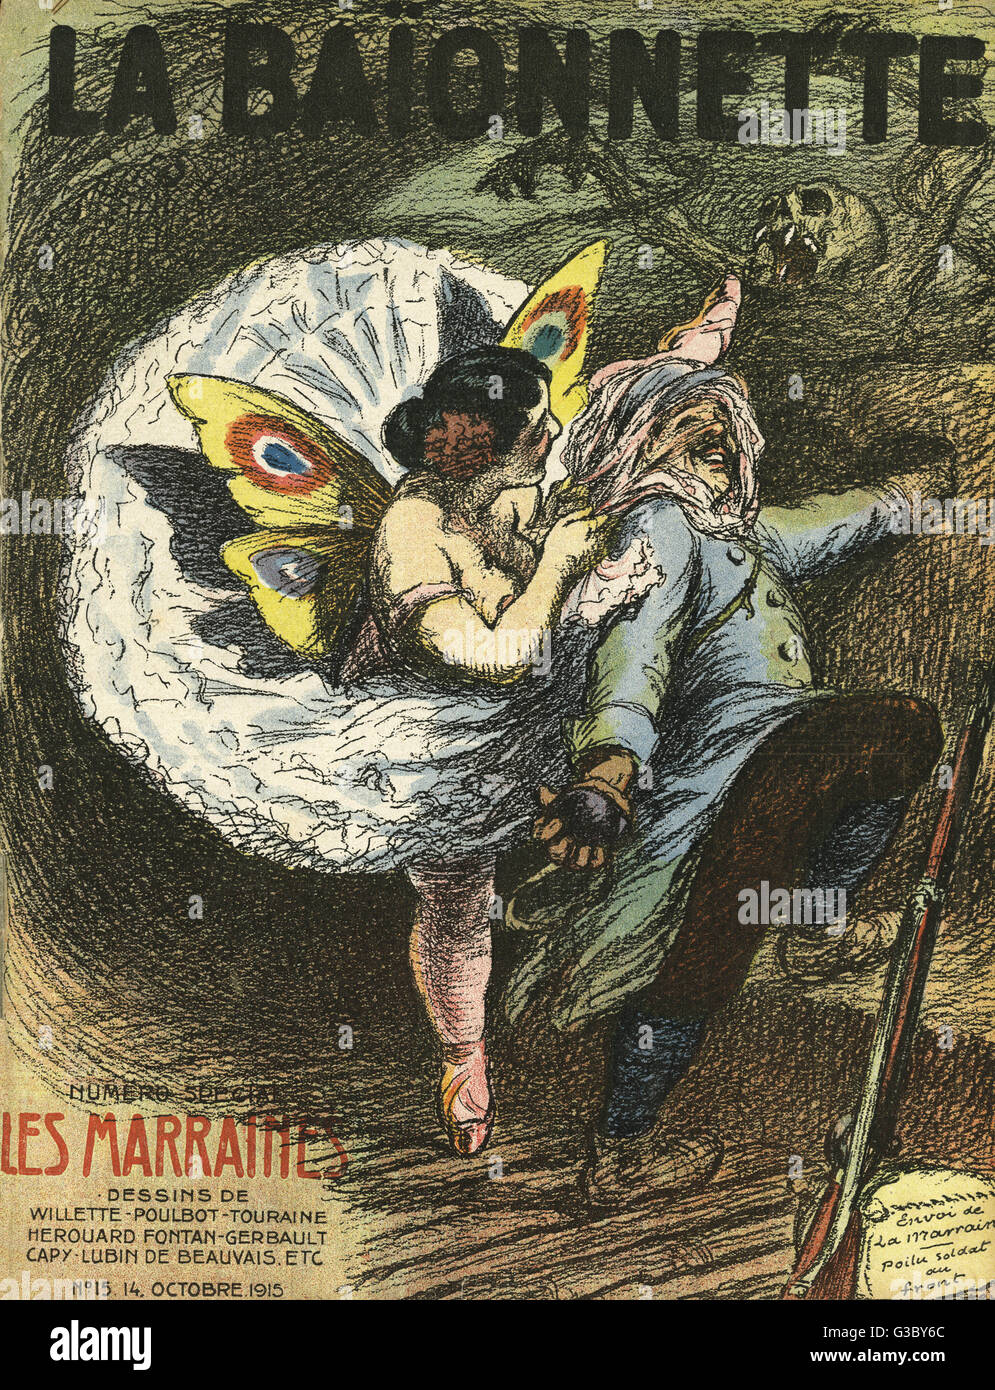 Front cover of La Baionnette, an issue focusing on godmothers (women assigned to soldiers during the war), showing a rather plump ballet dancer in fairy costume standing by a soldier in a trench.      Date: 1915 Stock Photo